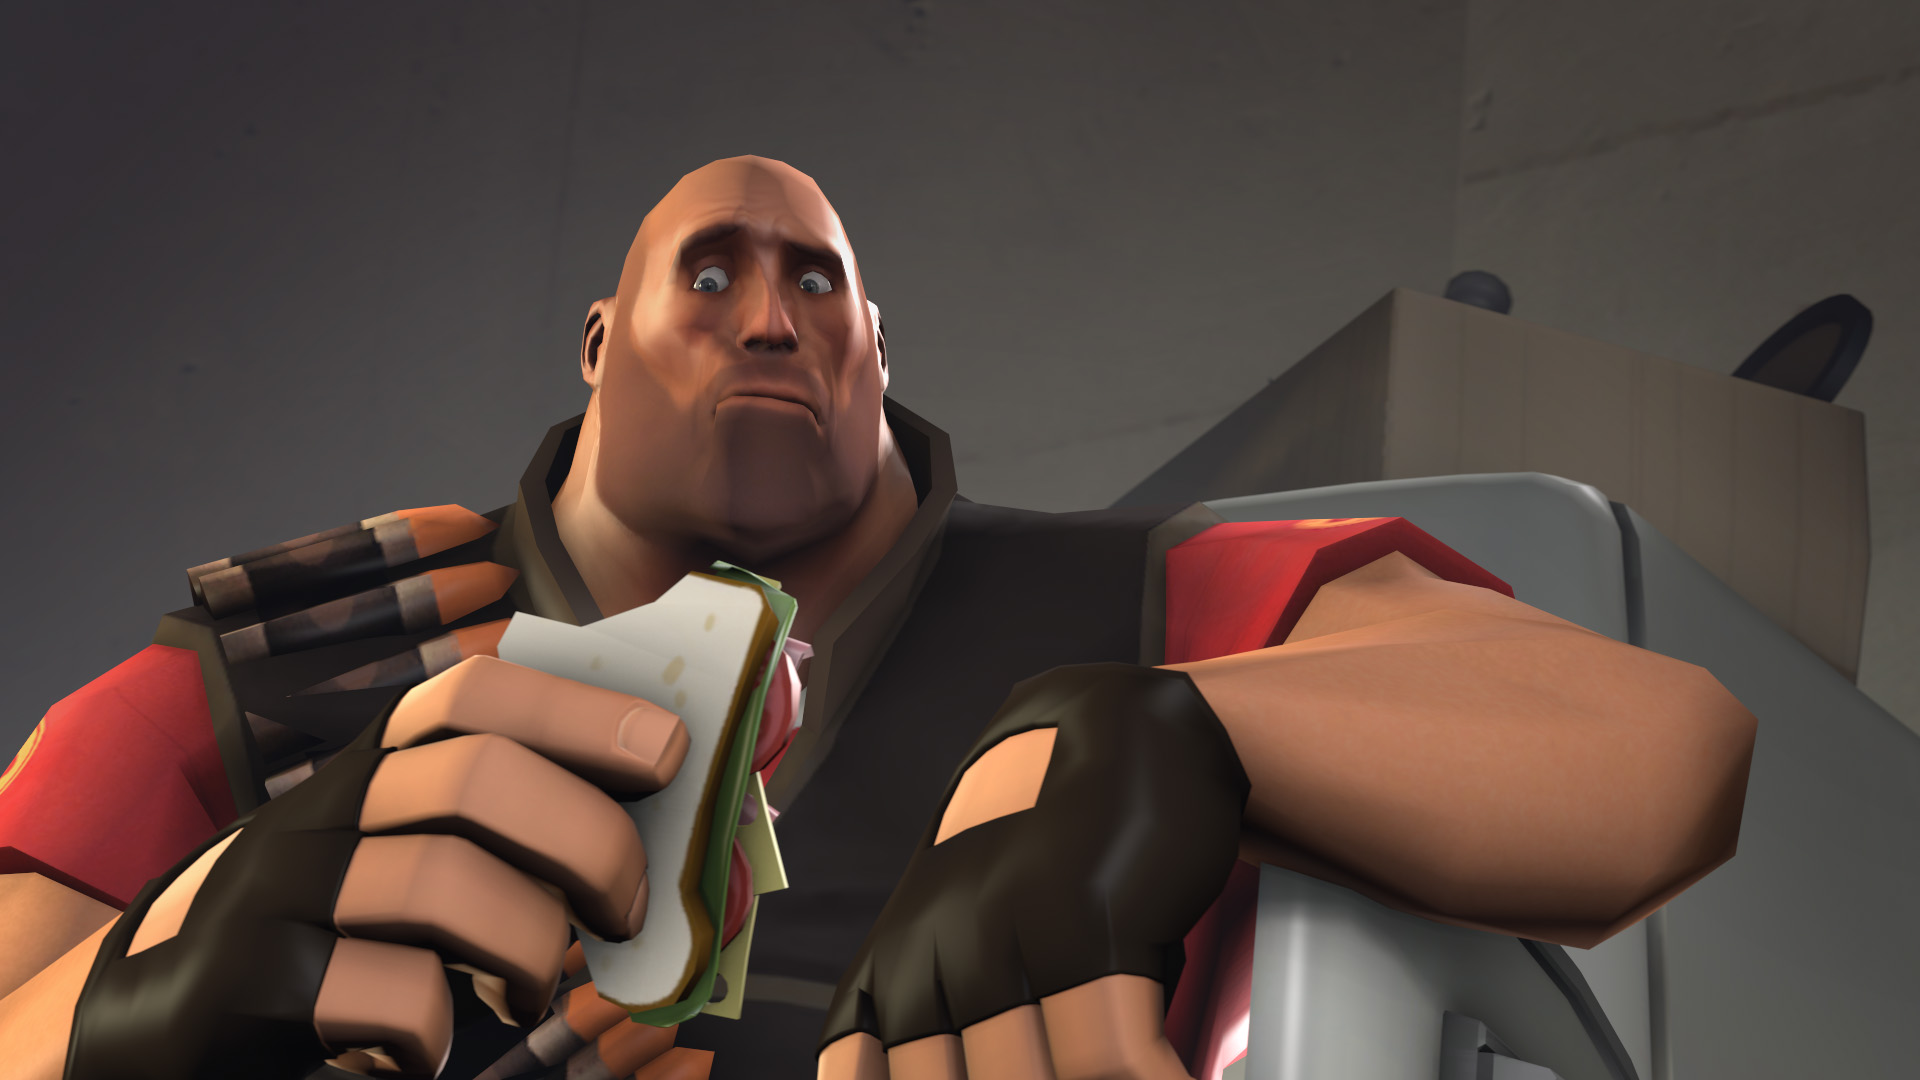 The Heavy enjoying(?) a sandwich, but also confused